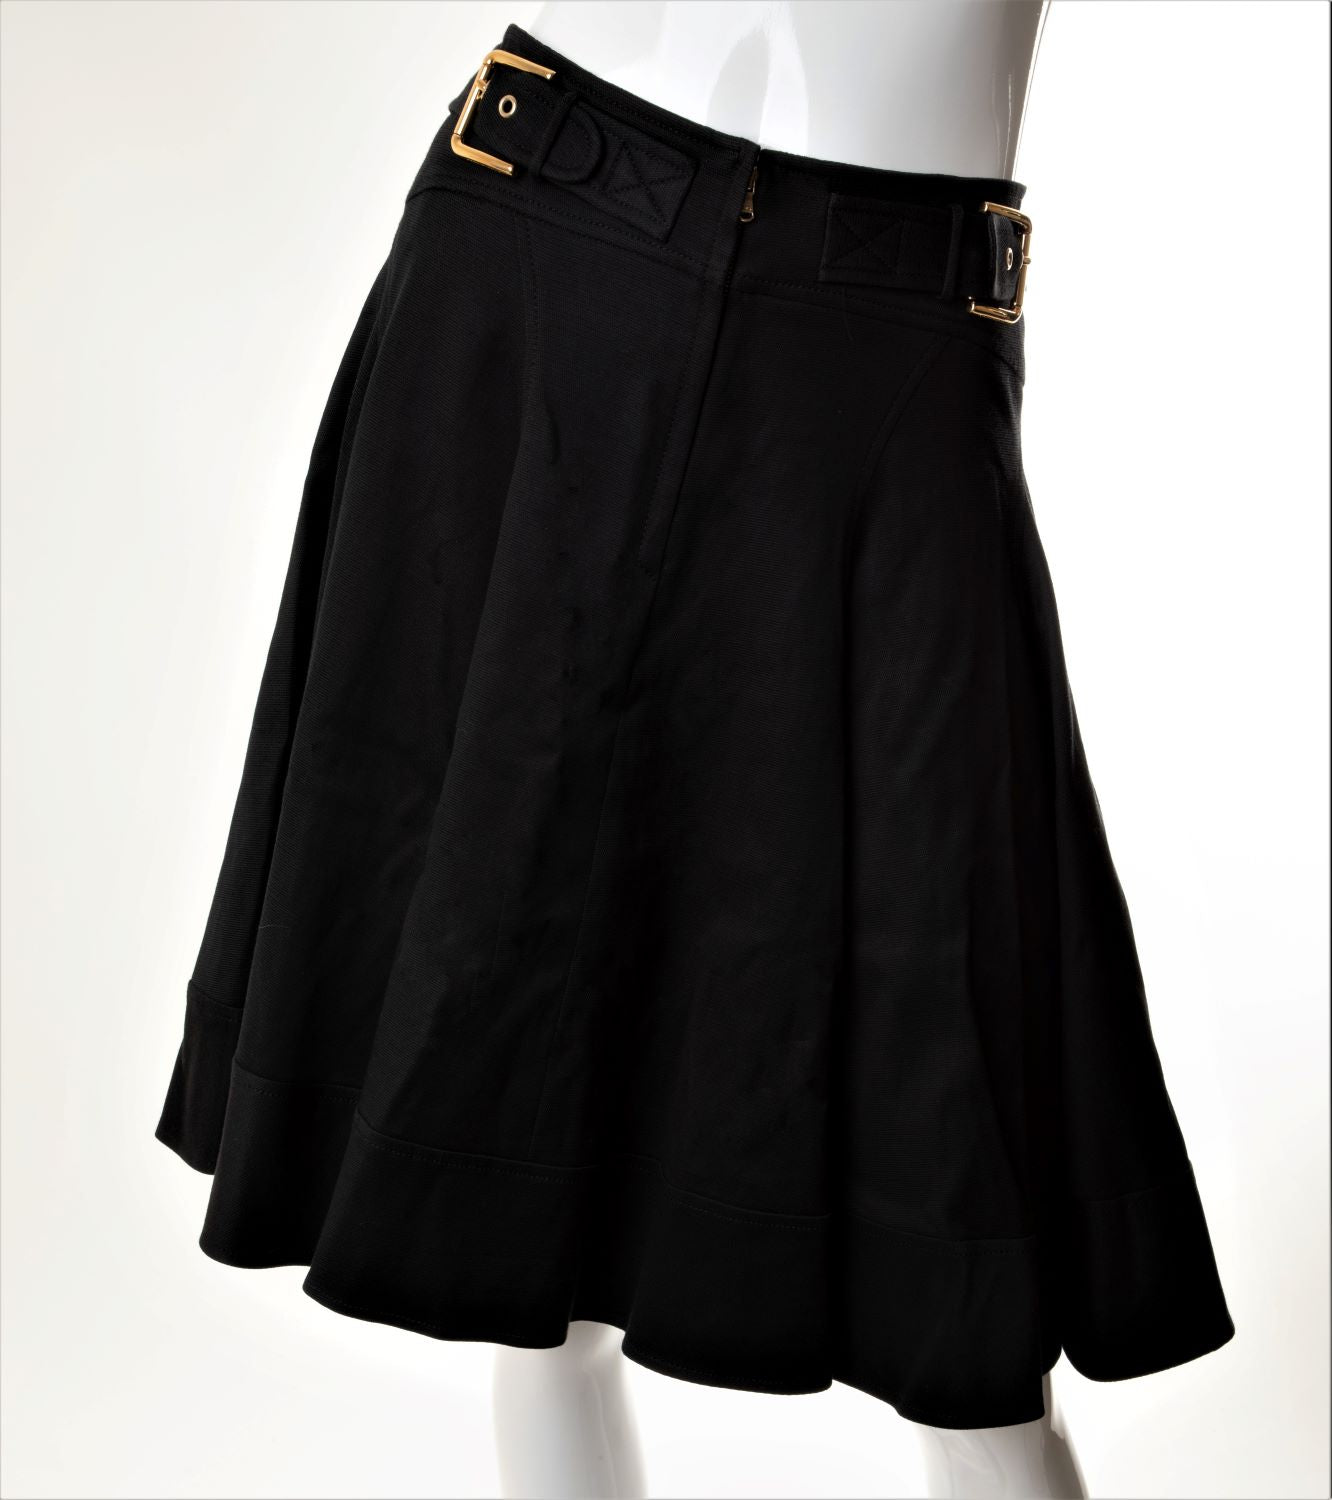 Dolce & Gabbana - Cotton Flair Skirt with Buckled Belts